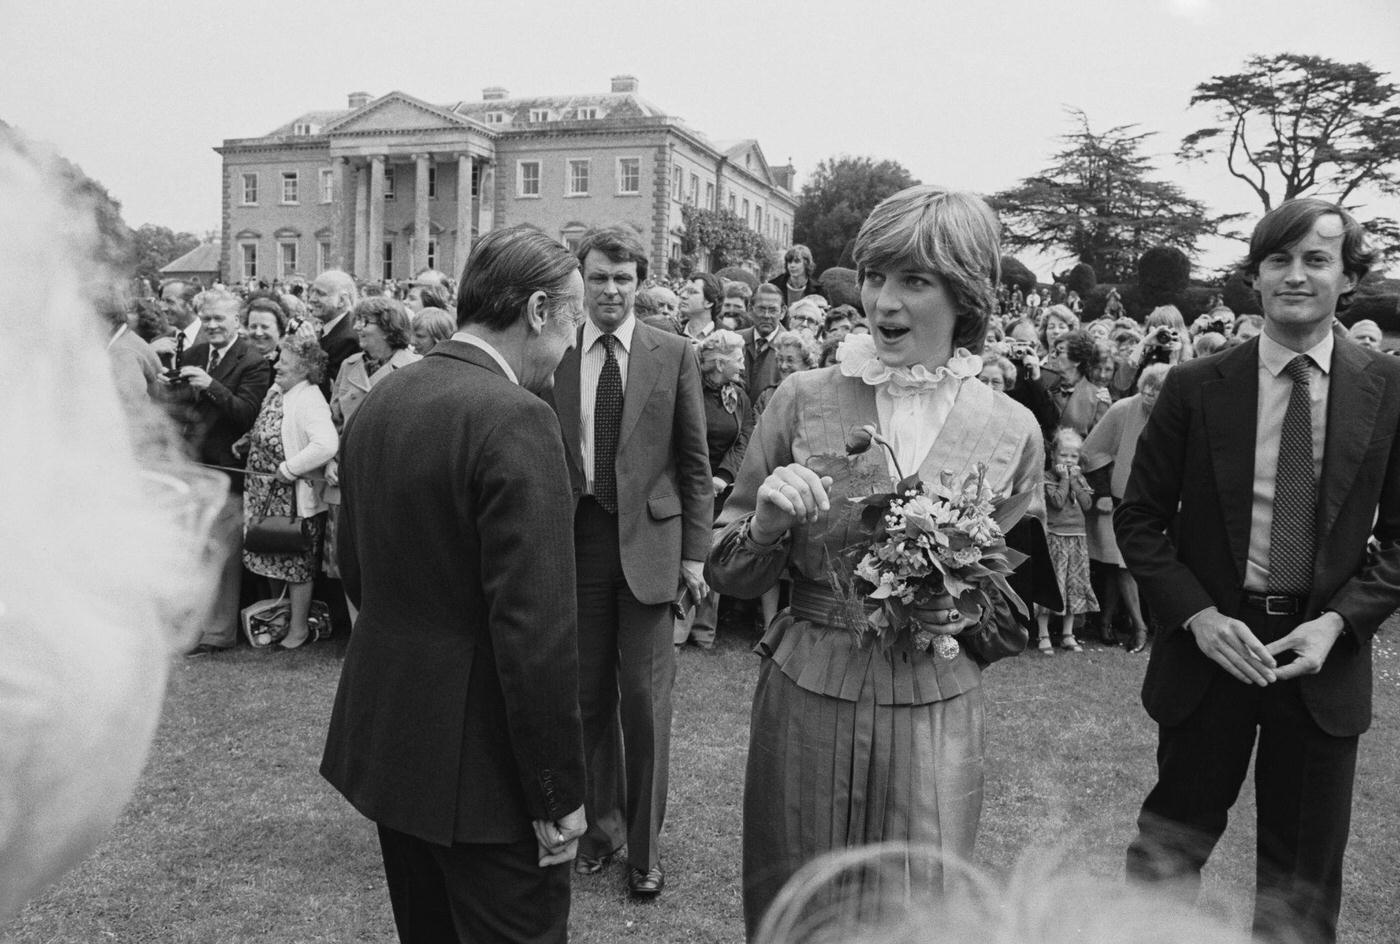 The Princess of Wales Visits Broadlands, Estate of Lord Mountbatten of Burma, in Romsey, Hampshire, 1981